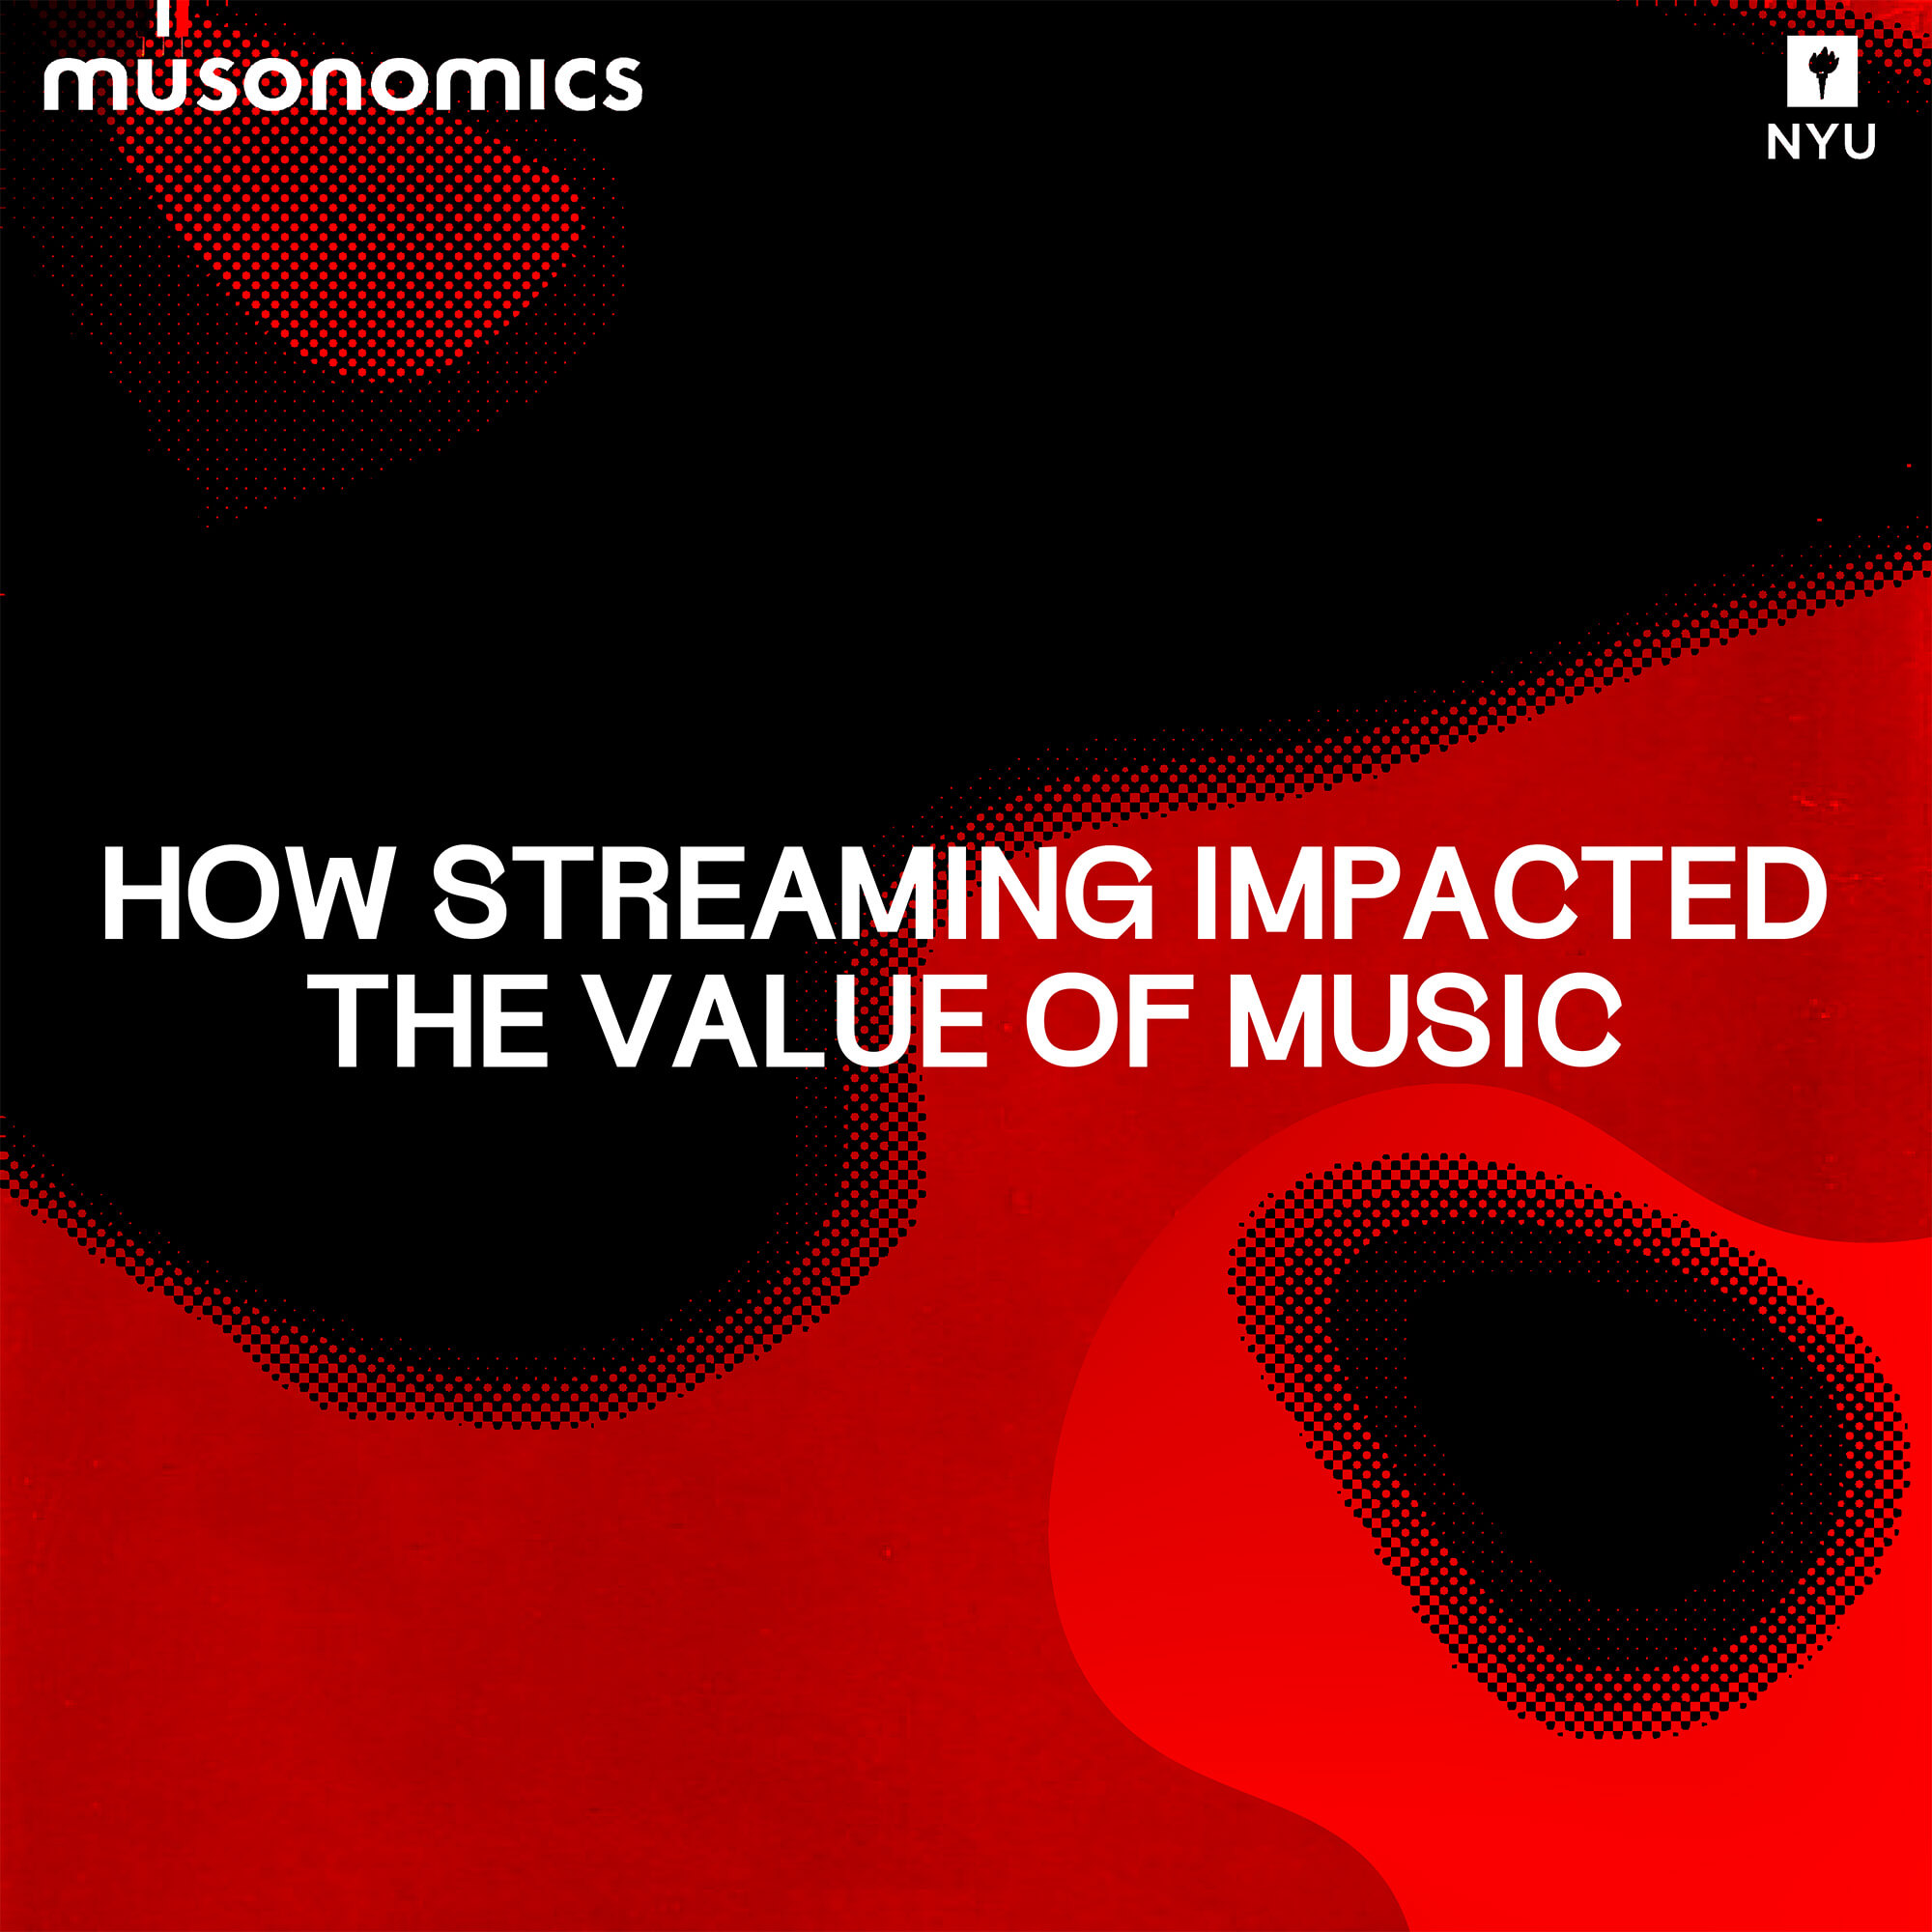 How Streaming Impacted the Value of Music